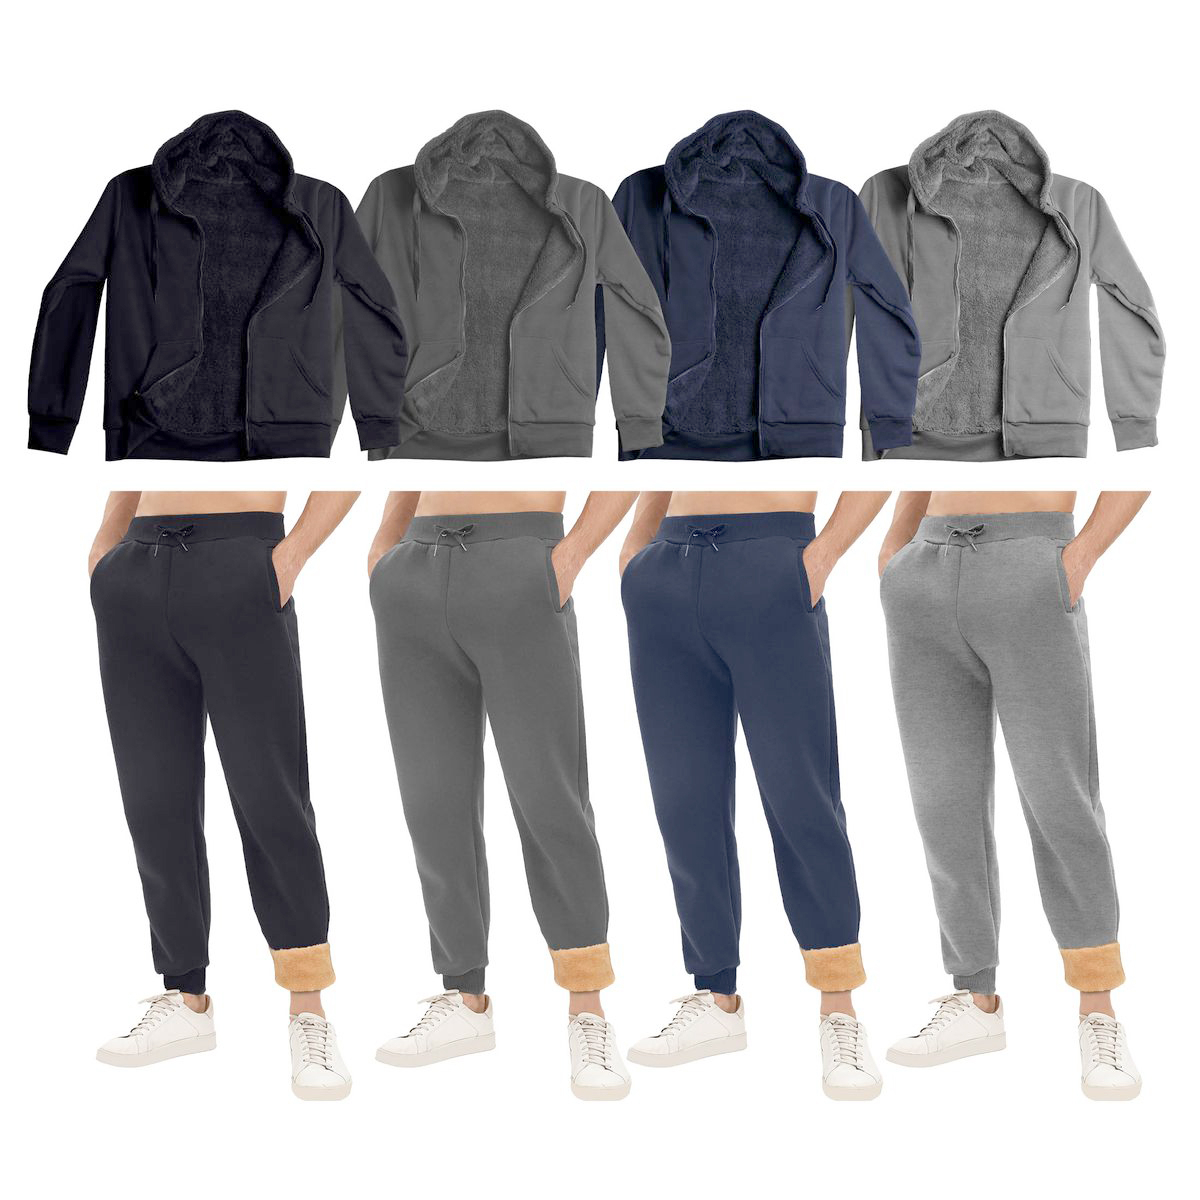 2-Pack: Men's Big & Tall Casual Super Soft Winter Warm Thick Sherpa Lined Sweatsuit Jogger Set - Grey, Xx-large